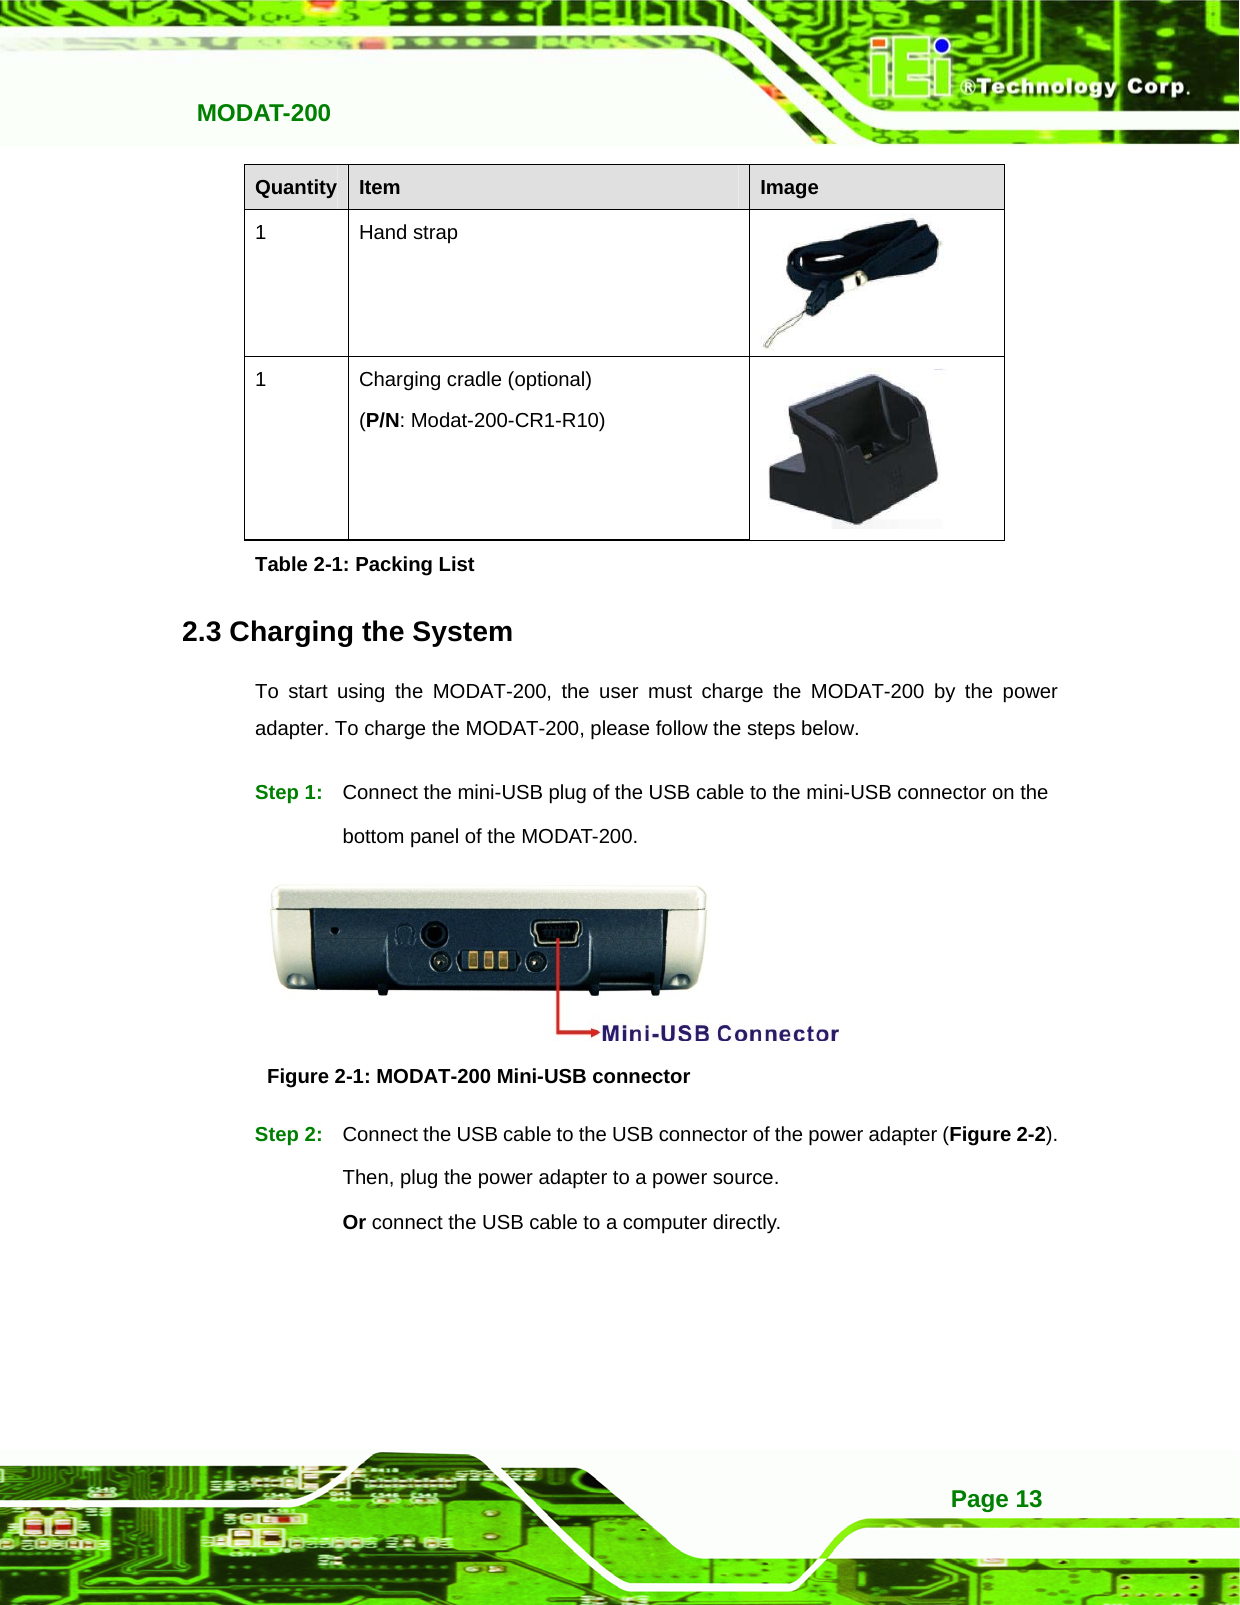   MODAT-200 Page 13Quantity  Item  Image 1 Hand strap  1  Charging cradle (optional) (P/N: Modat-200-CR1-R10)  Table 2-1: Packing List 2.3 Charging the System To start using the MODAT-200, the user must charge the MODAT-200 by the power adapter. To charge the MODAT-200, please follow the steps below. Step 1:  Connect the mini-USB plug of the USB cable to the mini-USB connector on the bottom panel of the MODAT-200.  Figure 2-1: MODAT-200 Mini-USB connector Step 2:  Connect the USB cable to the USB connector of the power adapter (Figure 2-2). Then, plug the power adapter to a power source. Or connect the USB cable to a computer directly.   